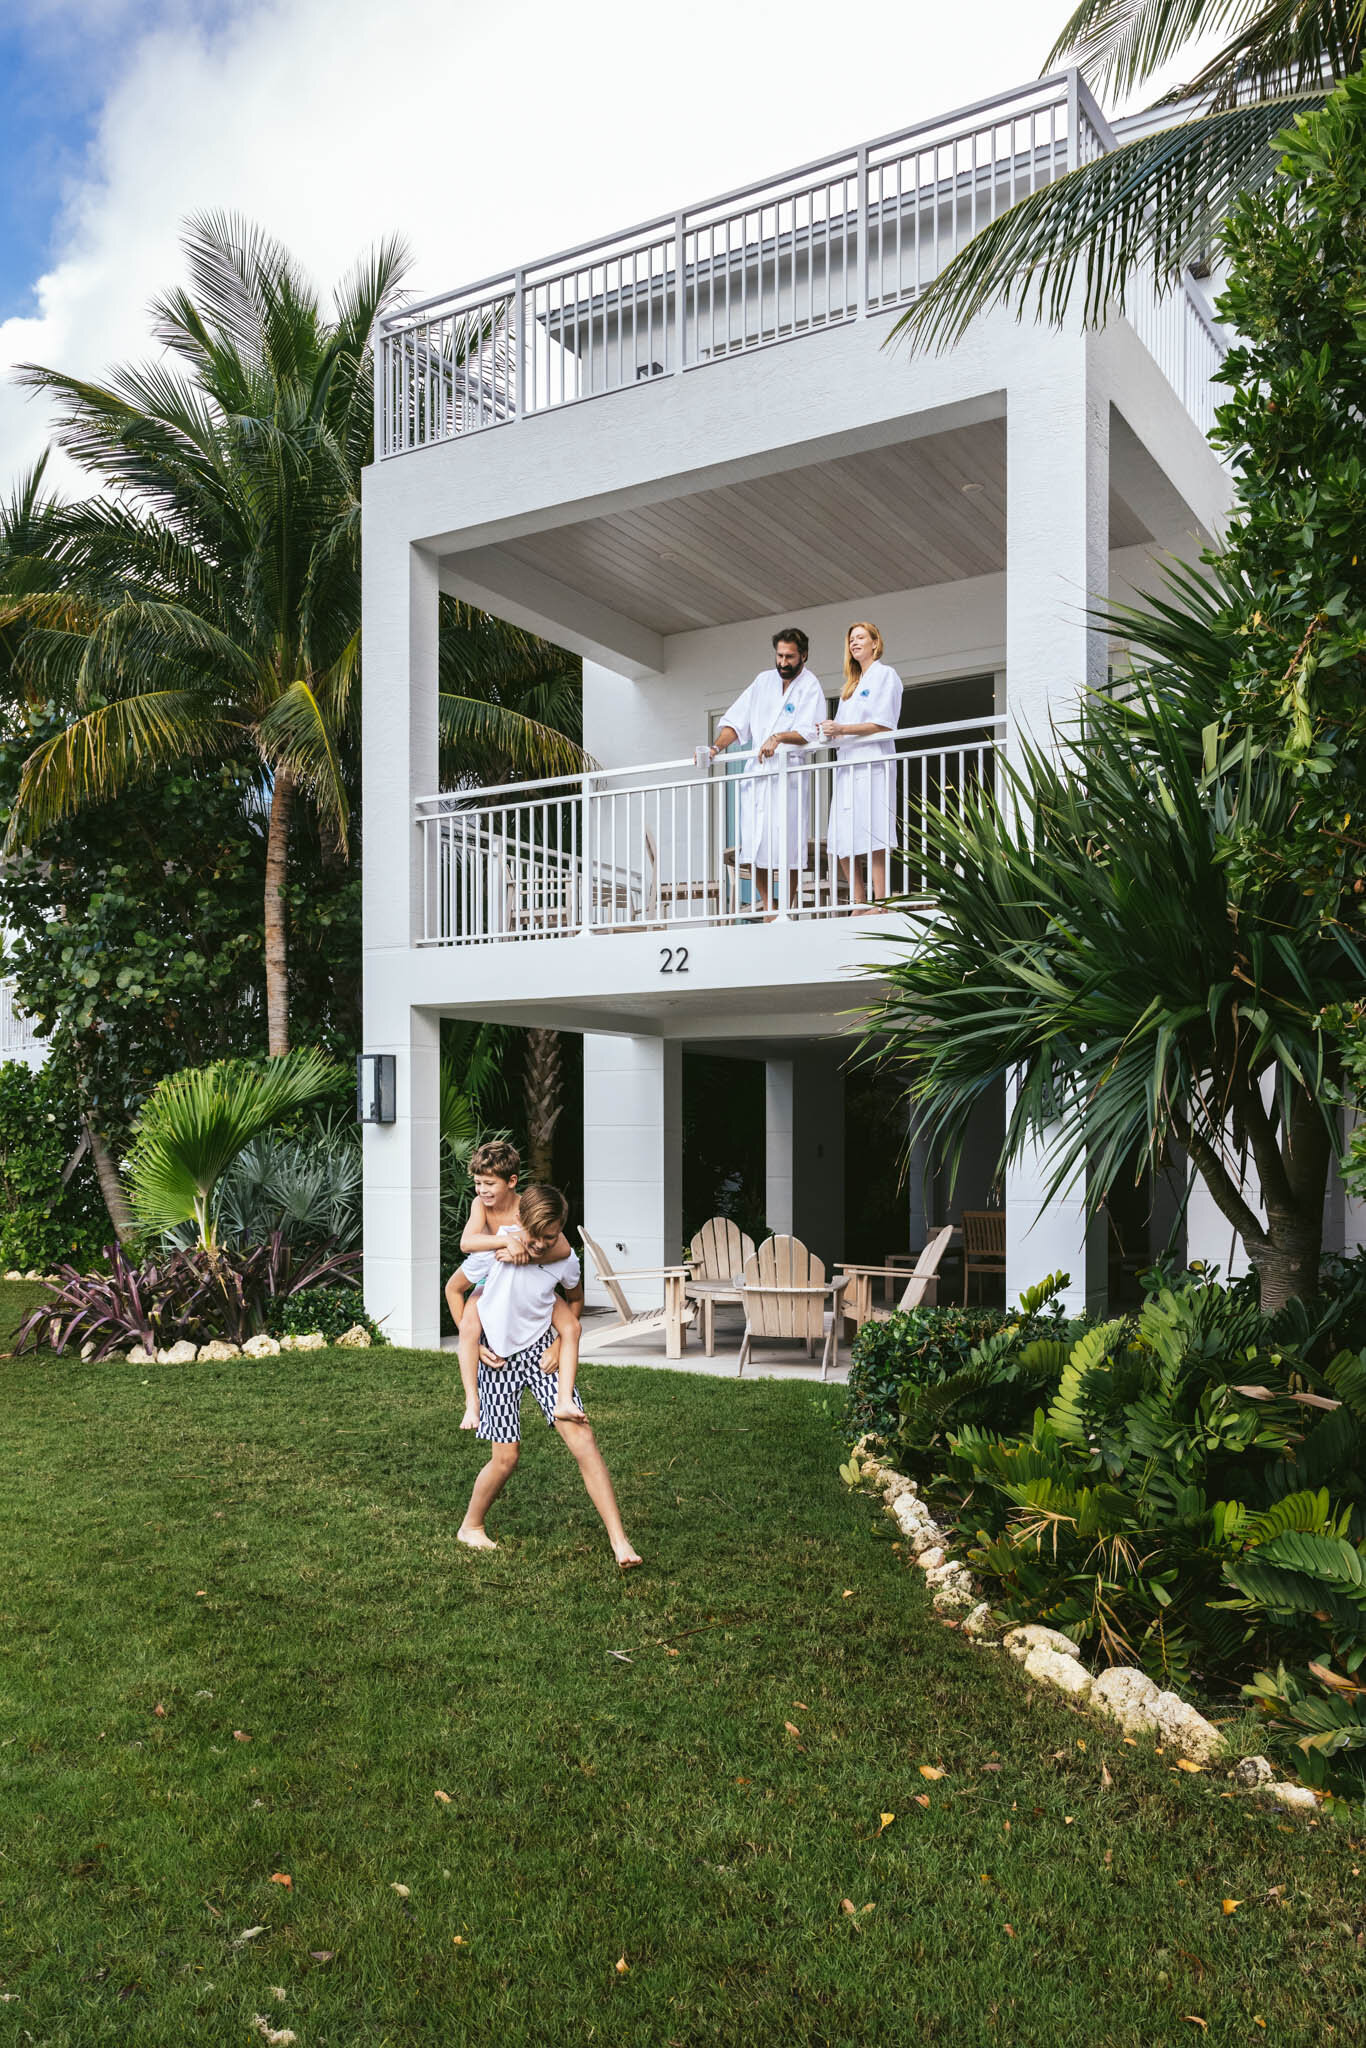  Two kids playing on the open lawn in front of an Islands waterfront villa as their parents look on from a covered first floor balcony. 